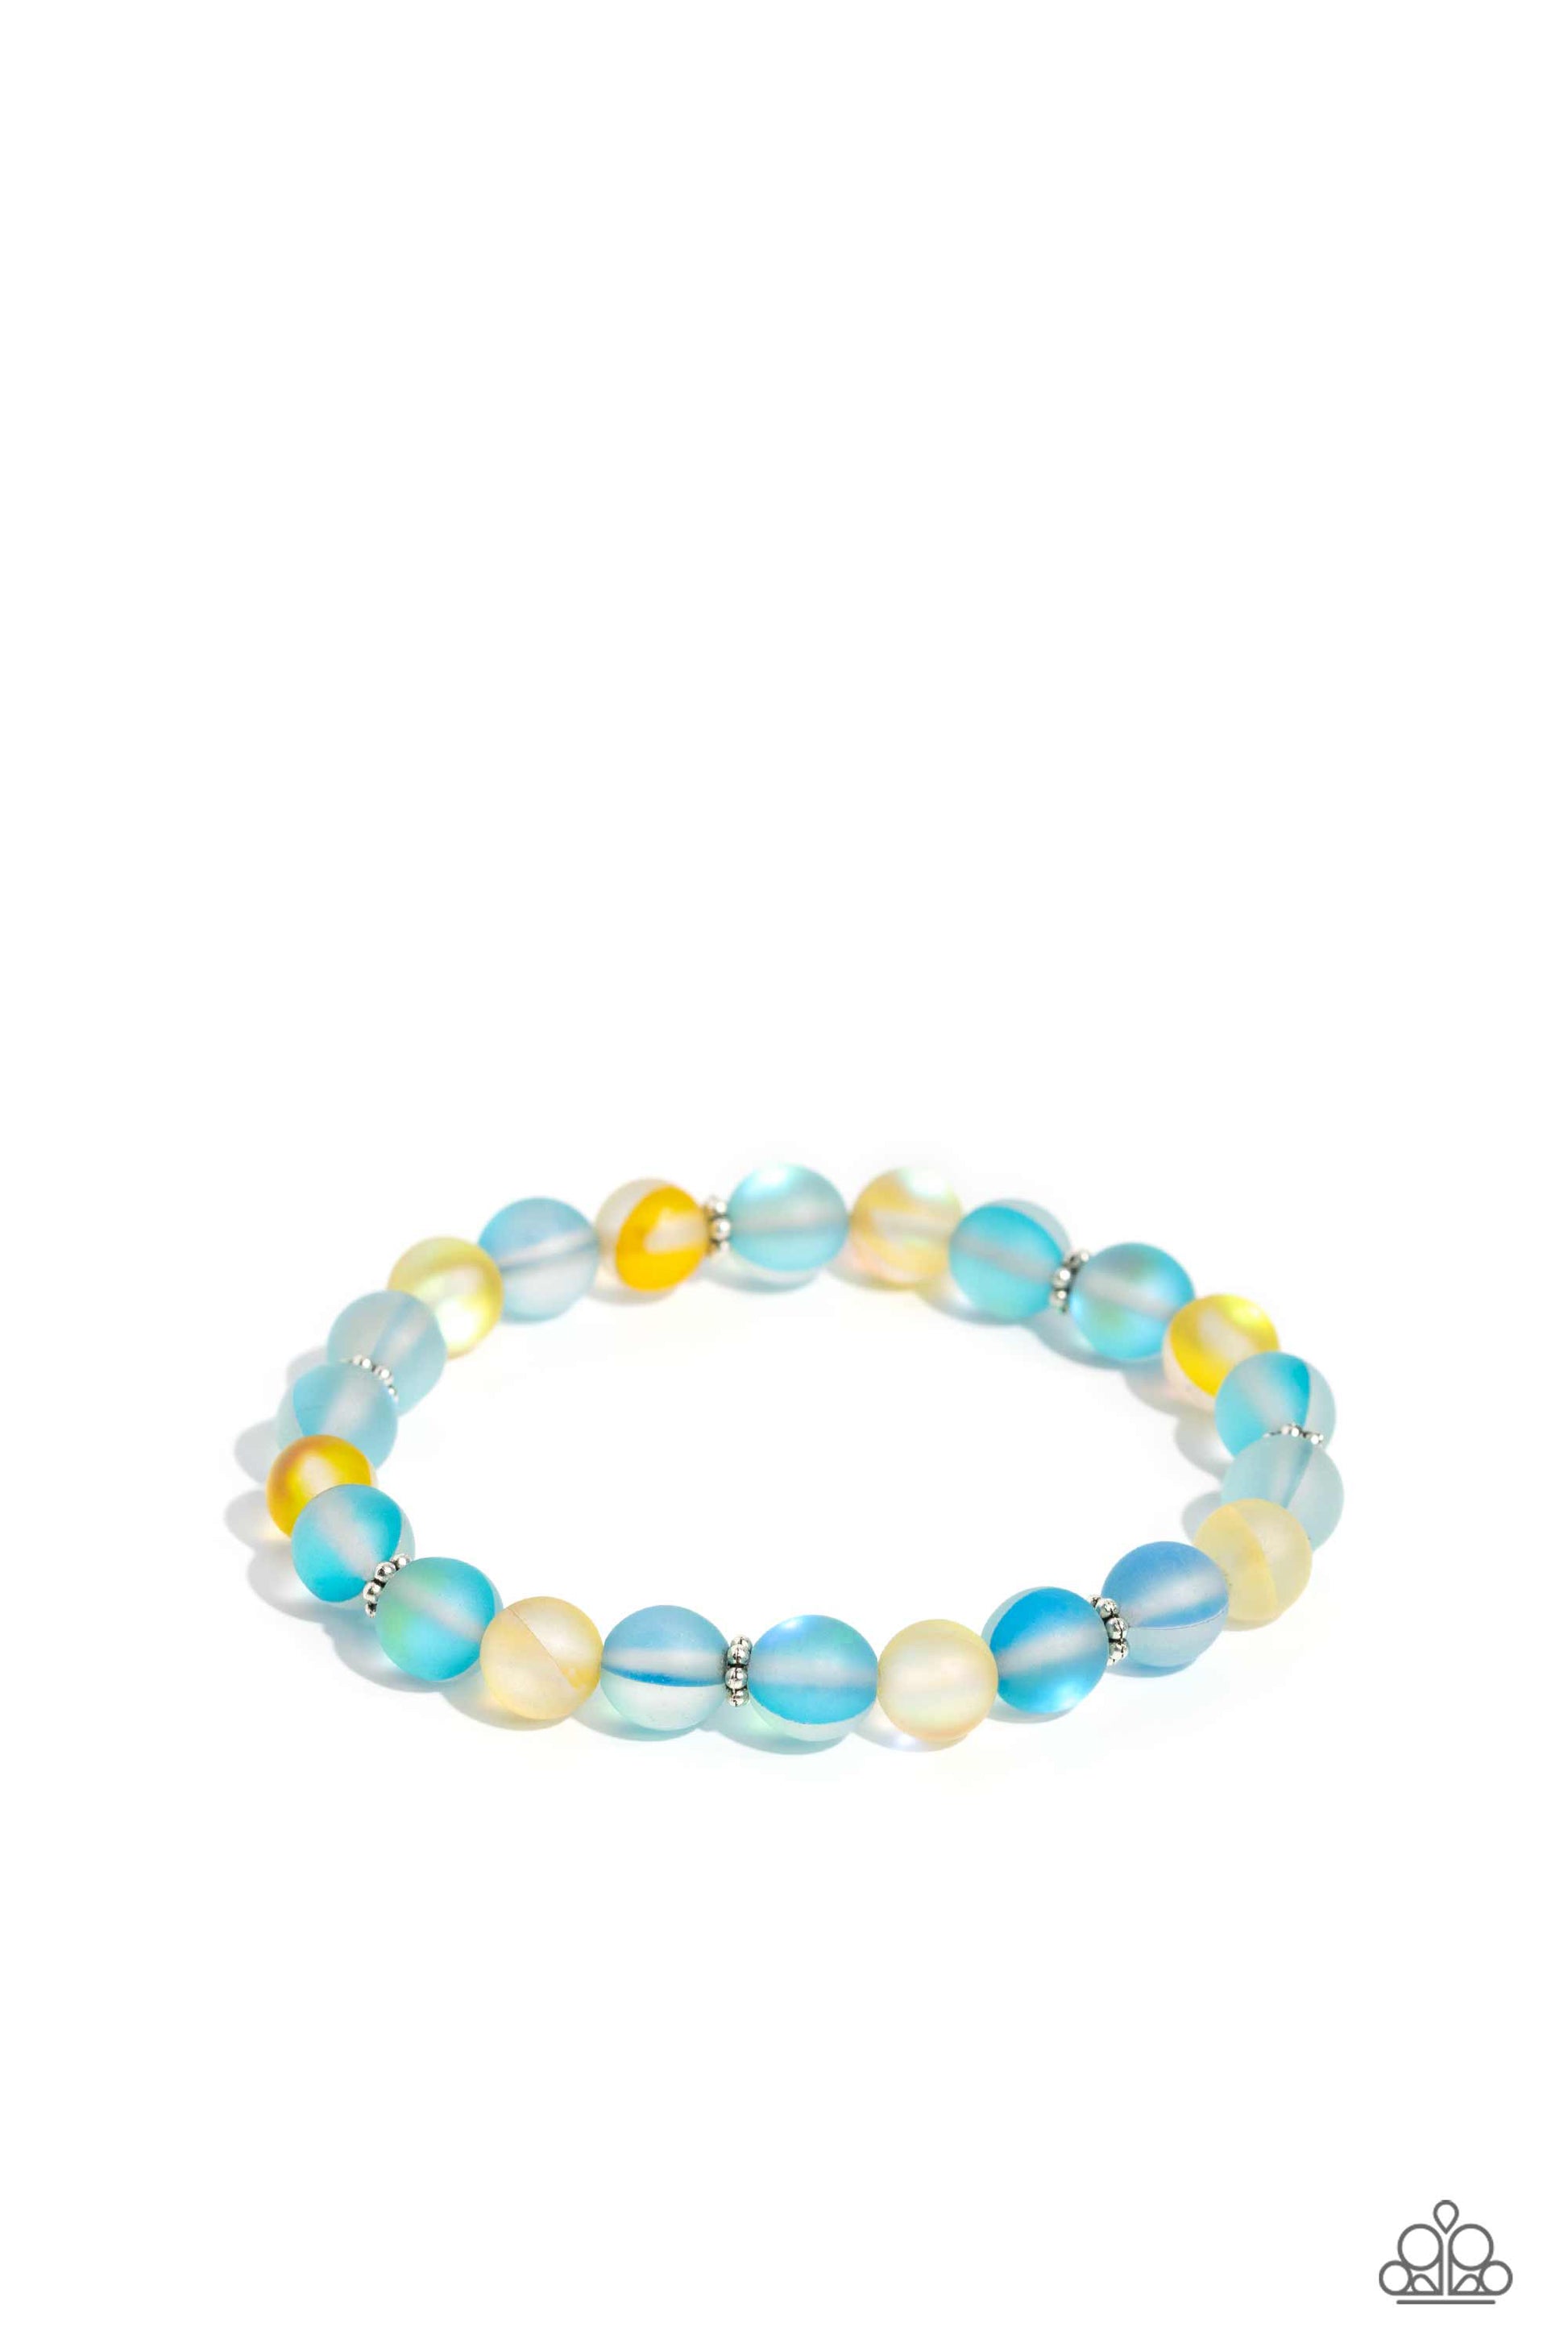 Infused with silver floral beads, a glassy collection of reflective blue and yellow-colored stone beads are threaded along an elastic stretchy band around the wrist for an adventurous pop of urban color.  Sold as one individual bracelet.